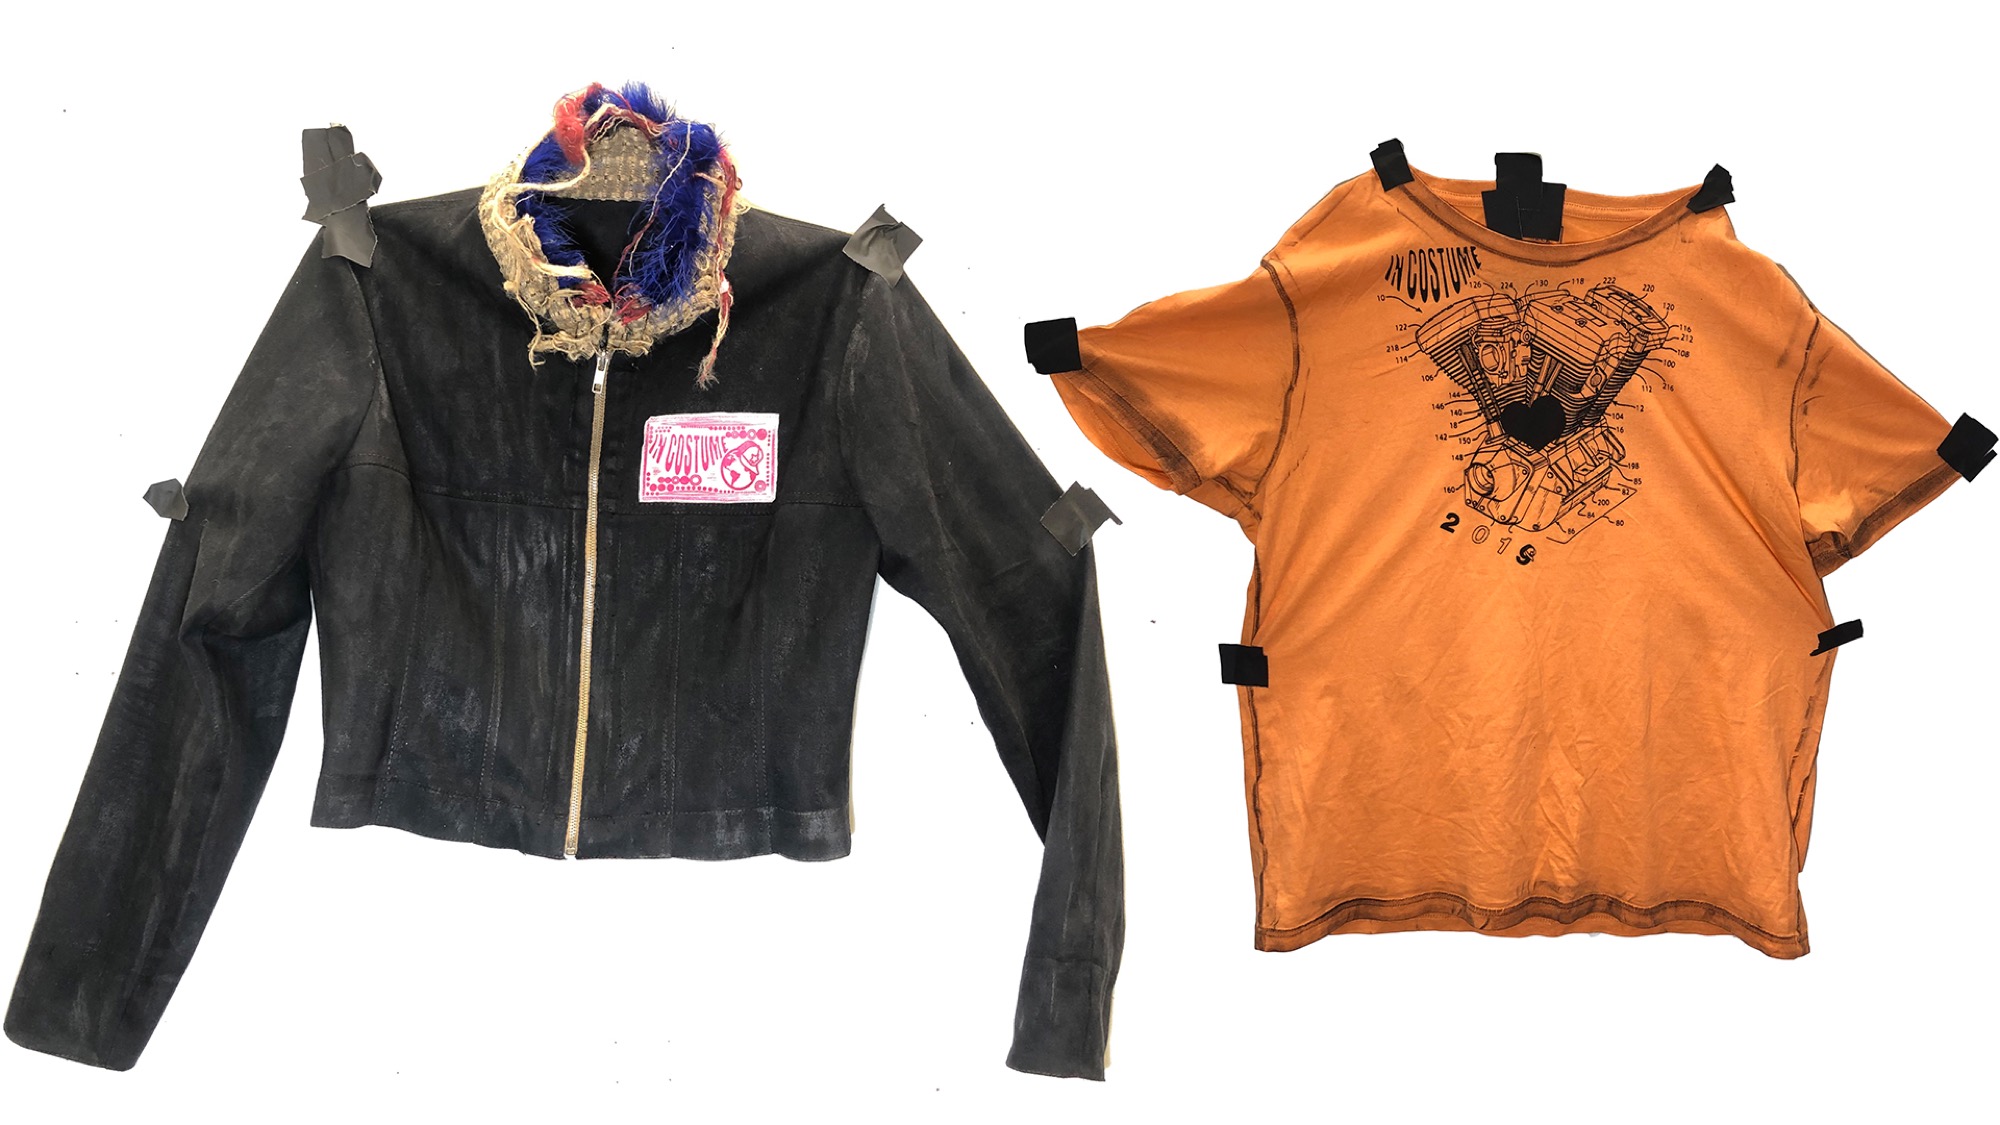 (Left) Brendan Morris, Waxed Jacket, 2019, cotton, silk, suede, feather. Image courtesy of artist. (Right) Brendan Morris, Commemorative ‘Label Launch’ Shirt, 2019.Image courtesy of artist.